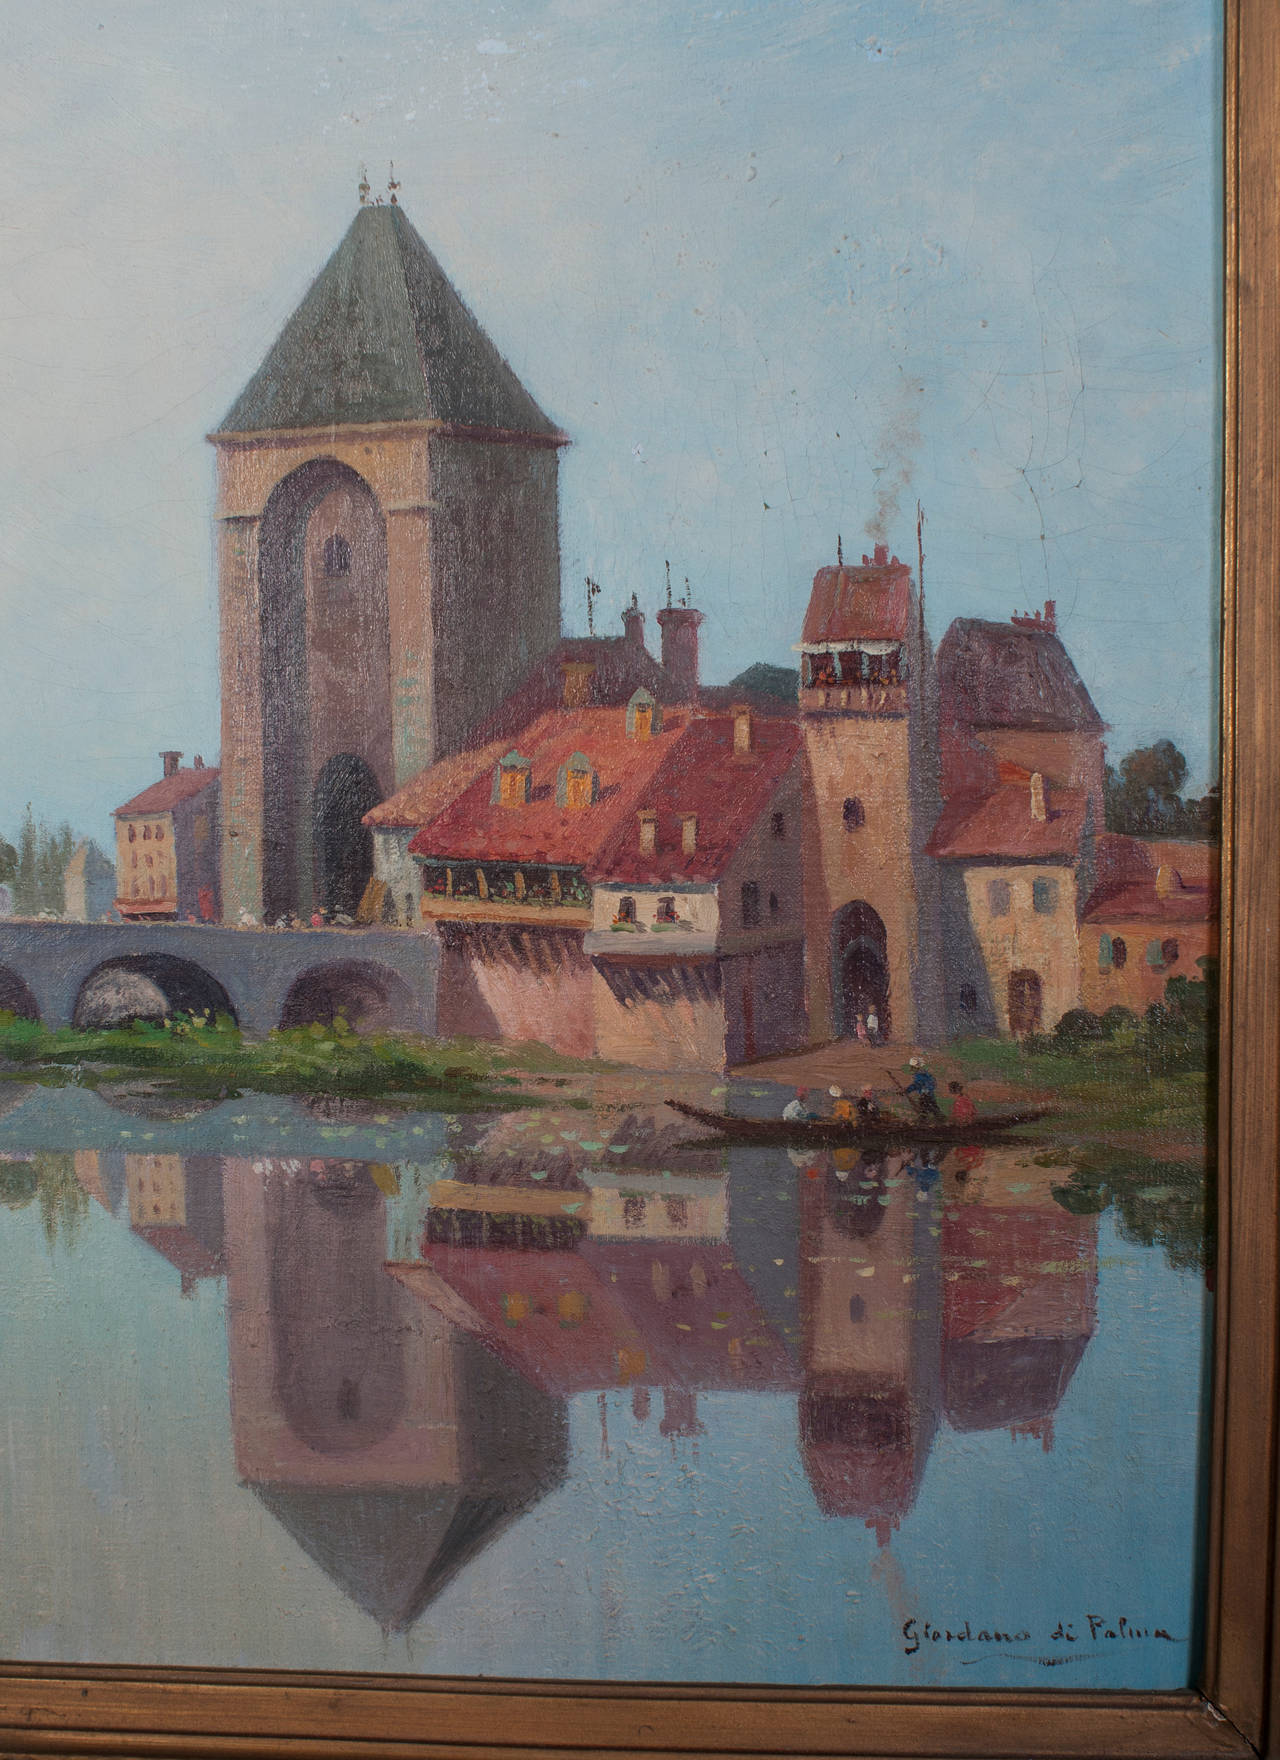 Water view of a town in Strasburg. Painted by Leon Jean Giordano 